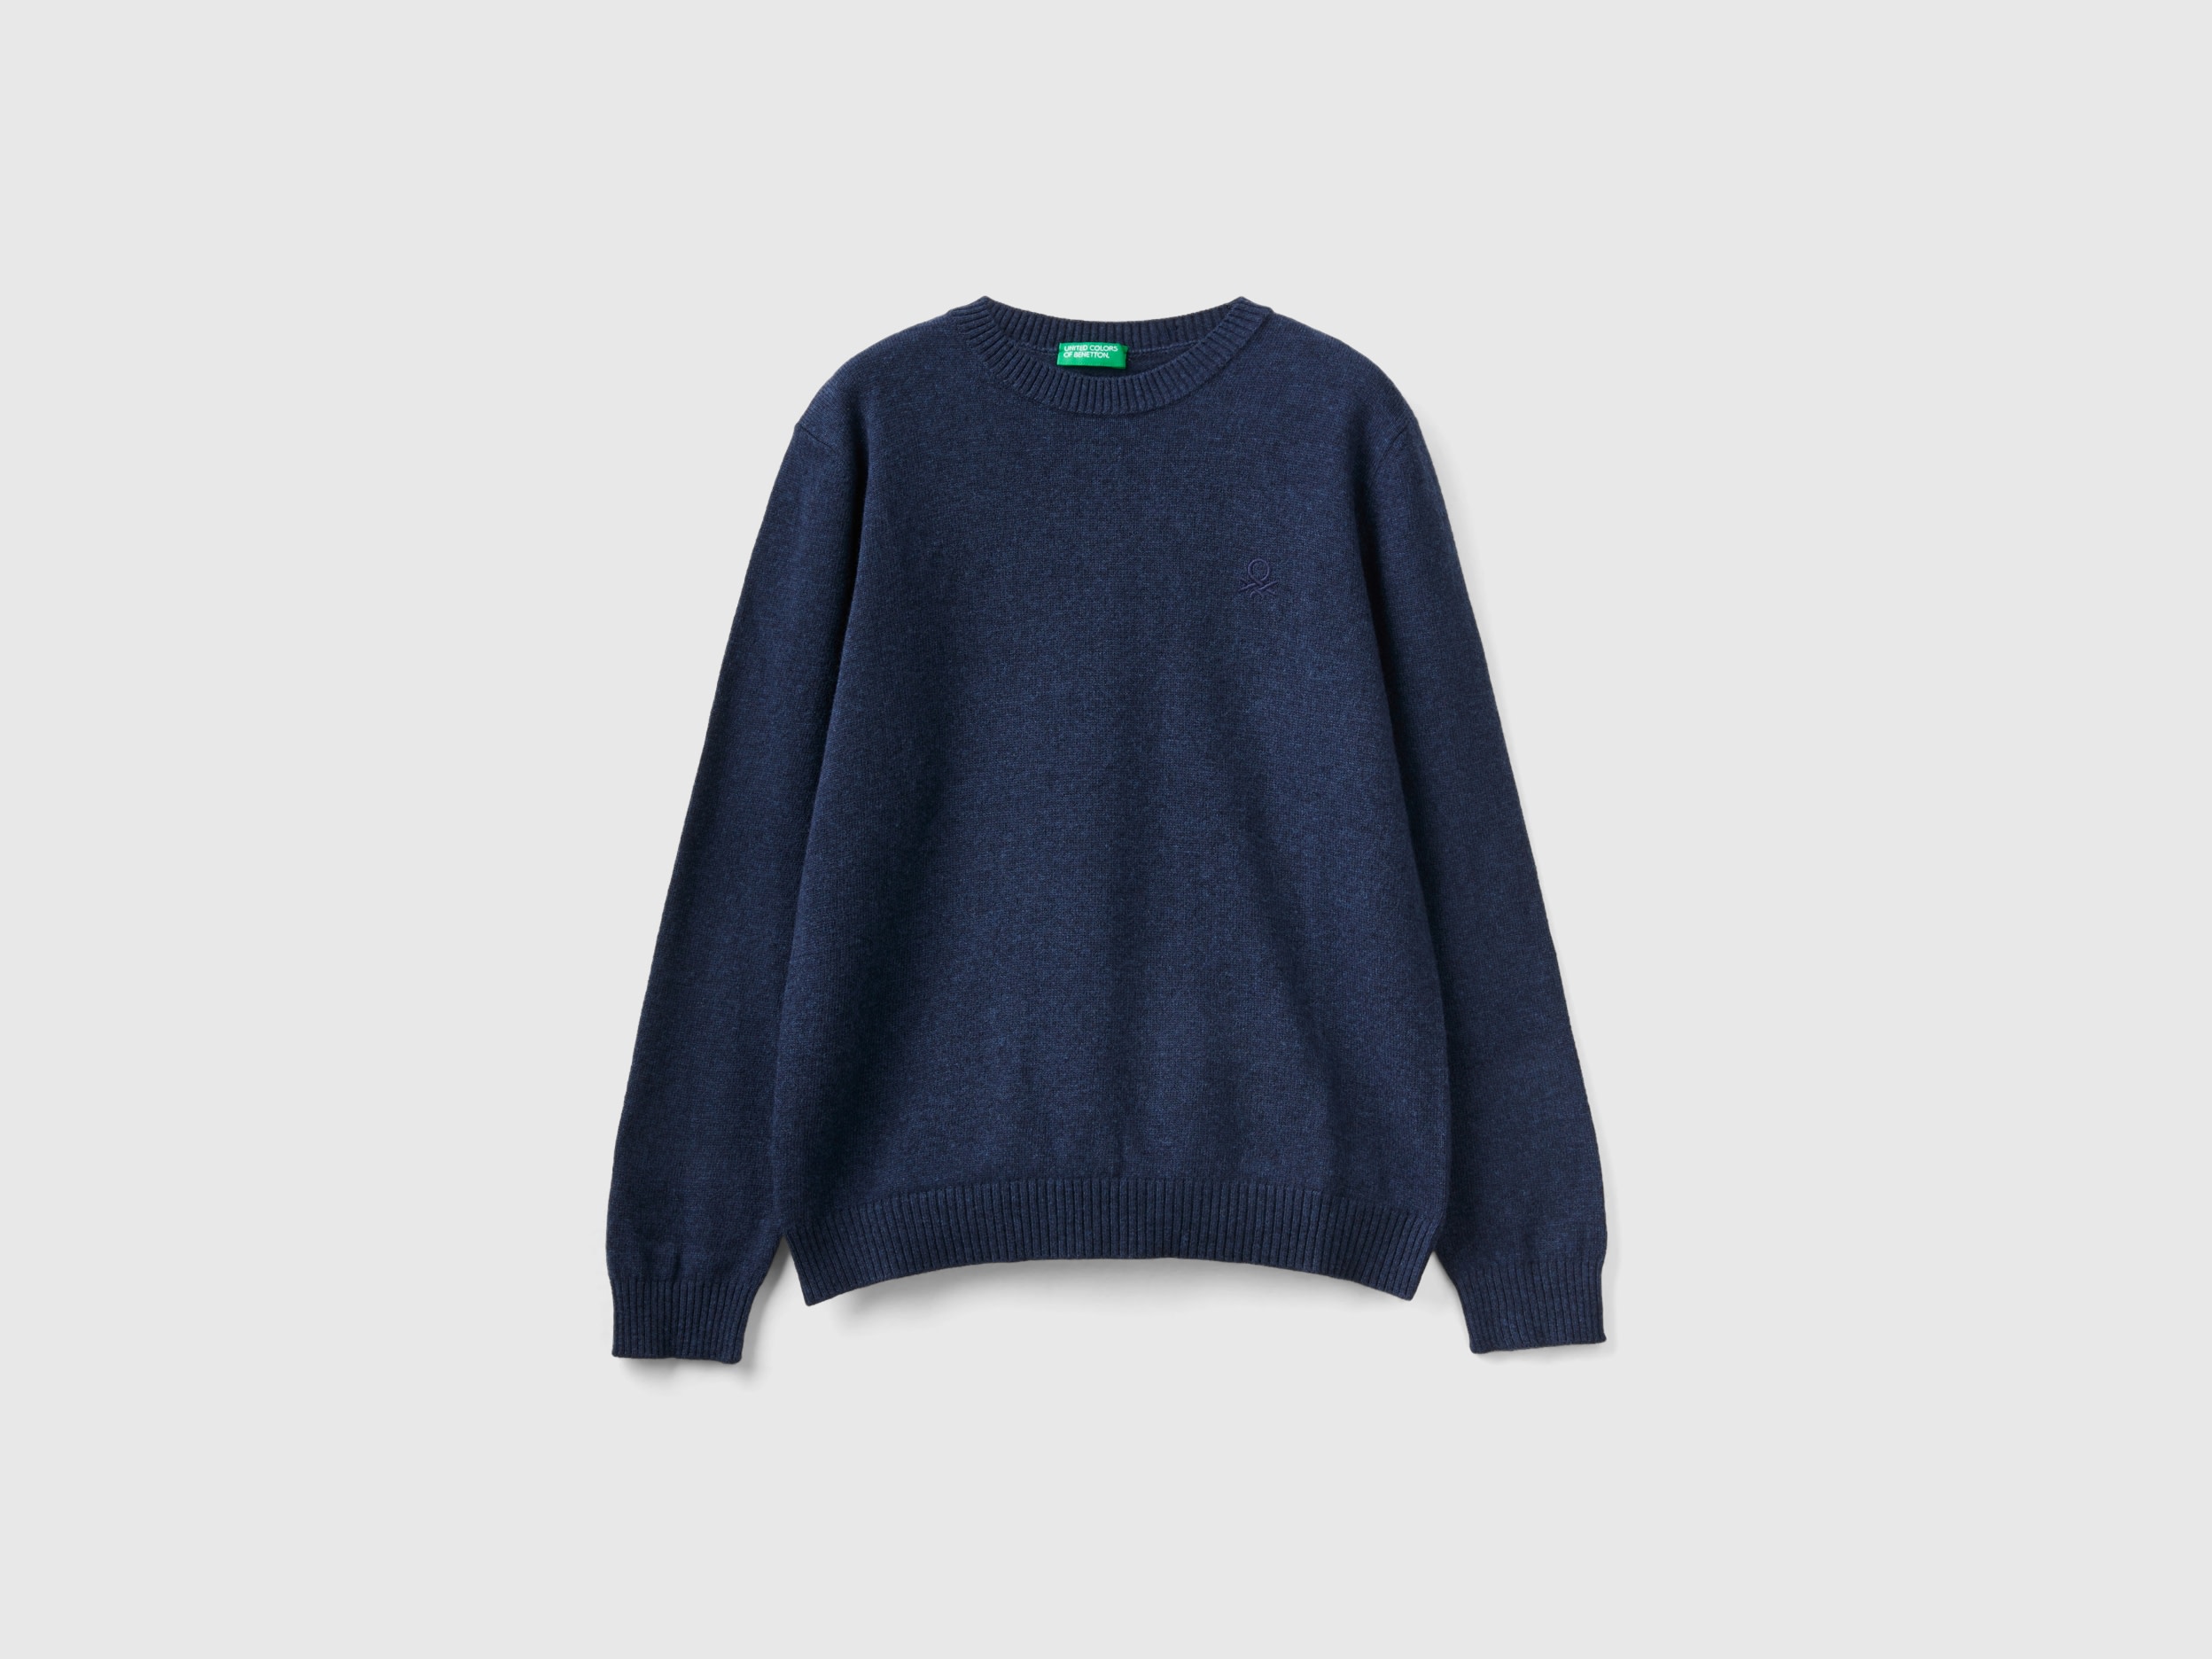 Benetton, Sweater In Cashmere And Wool Blend, size M, Dark Blue, Kids